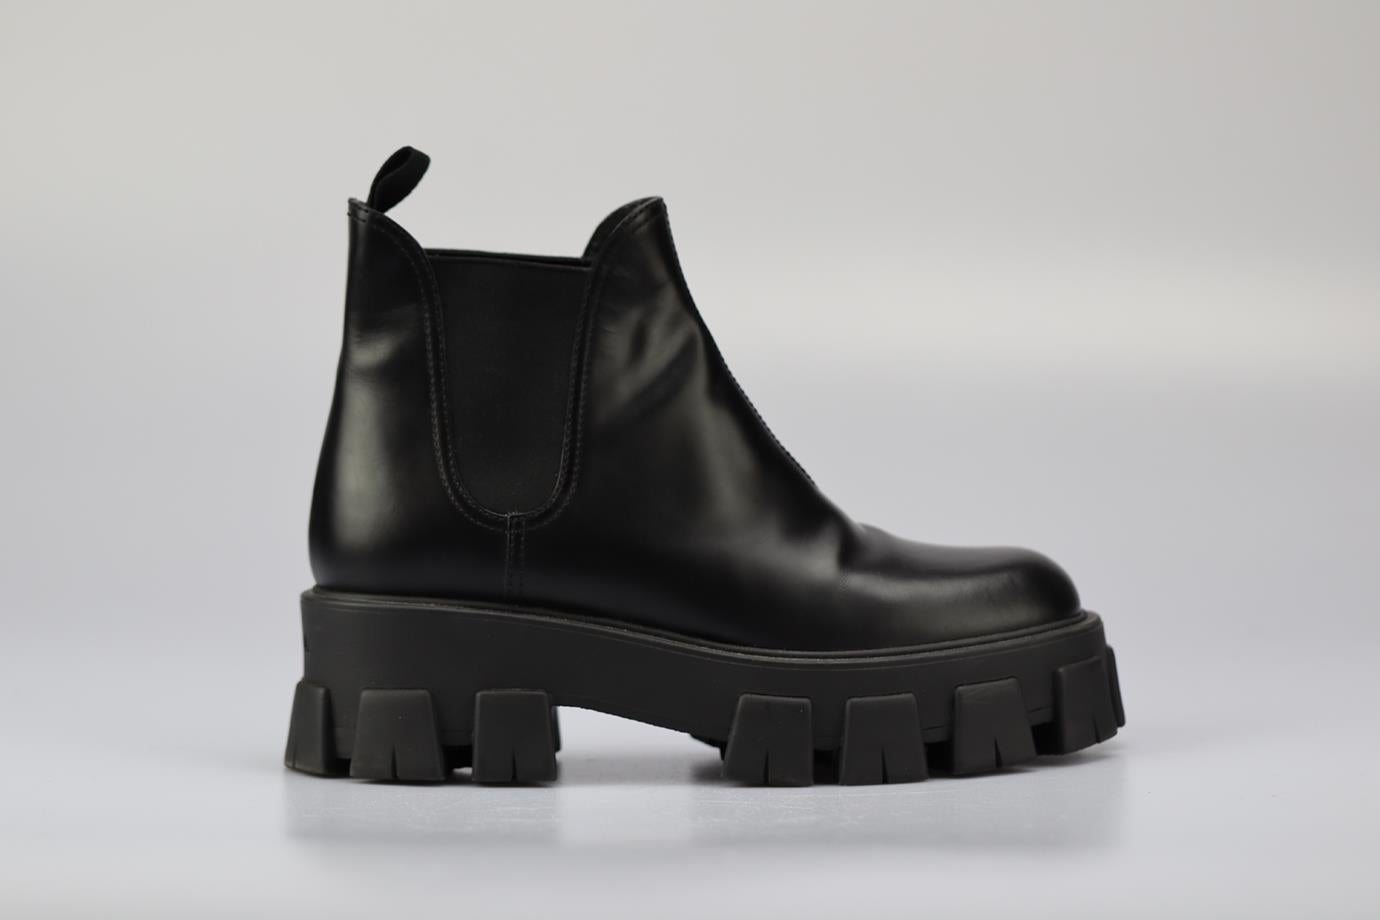 Prada Monolith Leather Platform Ankle Boots. Black. Pull on. Does not come with - dustbag or box. EU 40 (UK 7, US 10). Insole: 11.1 in. Heel height: 2.3 in. Platform: 2.3 in. Shaft: 5.3 in. Condition: Used. Very good condition - Light wear to soles